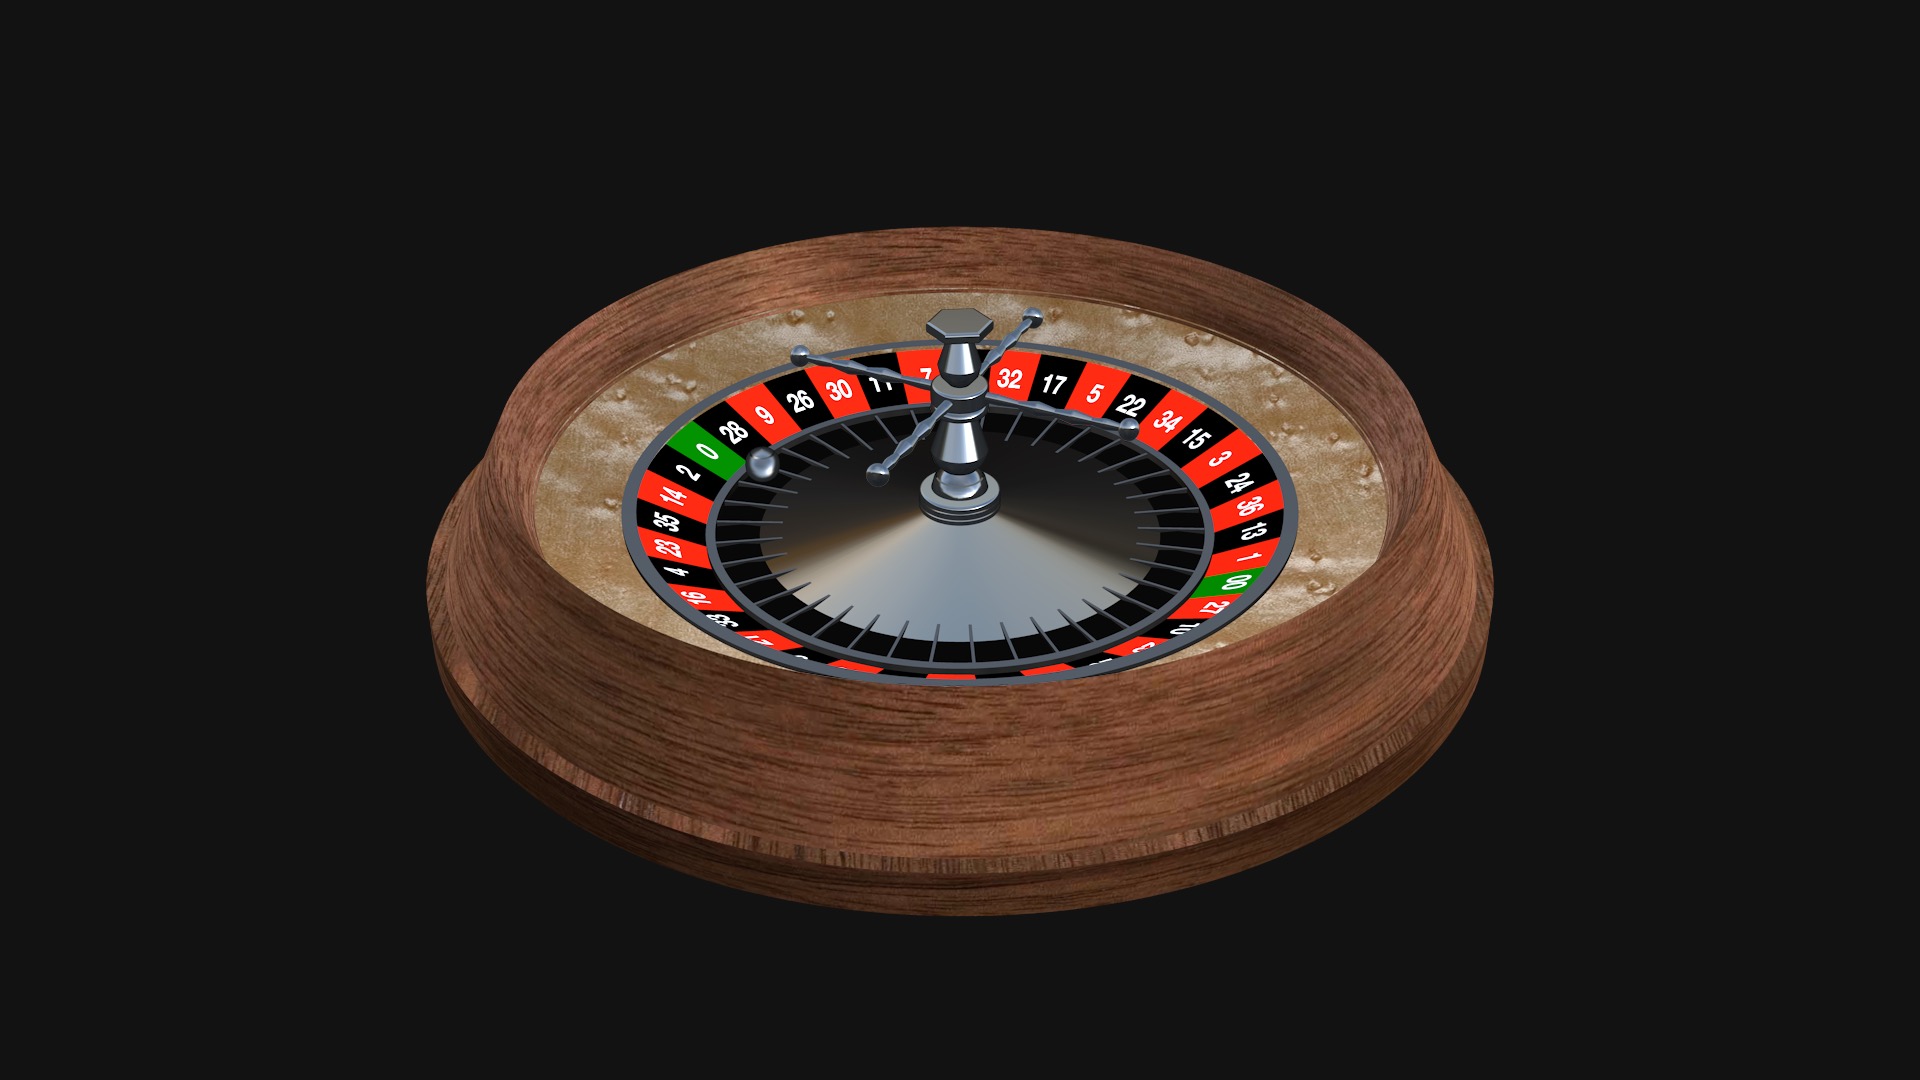 Roulette Wheel Model made with ZZSC Basic Shapes font by Sight-Creations